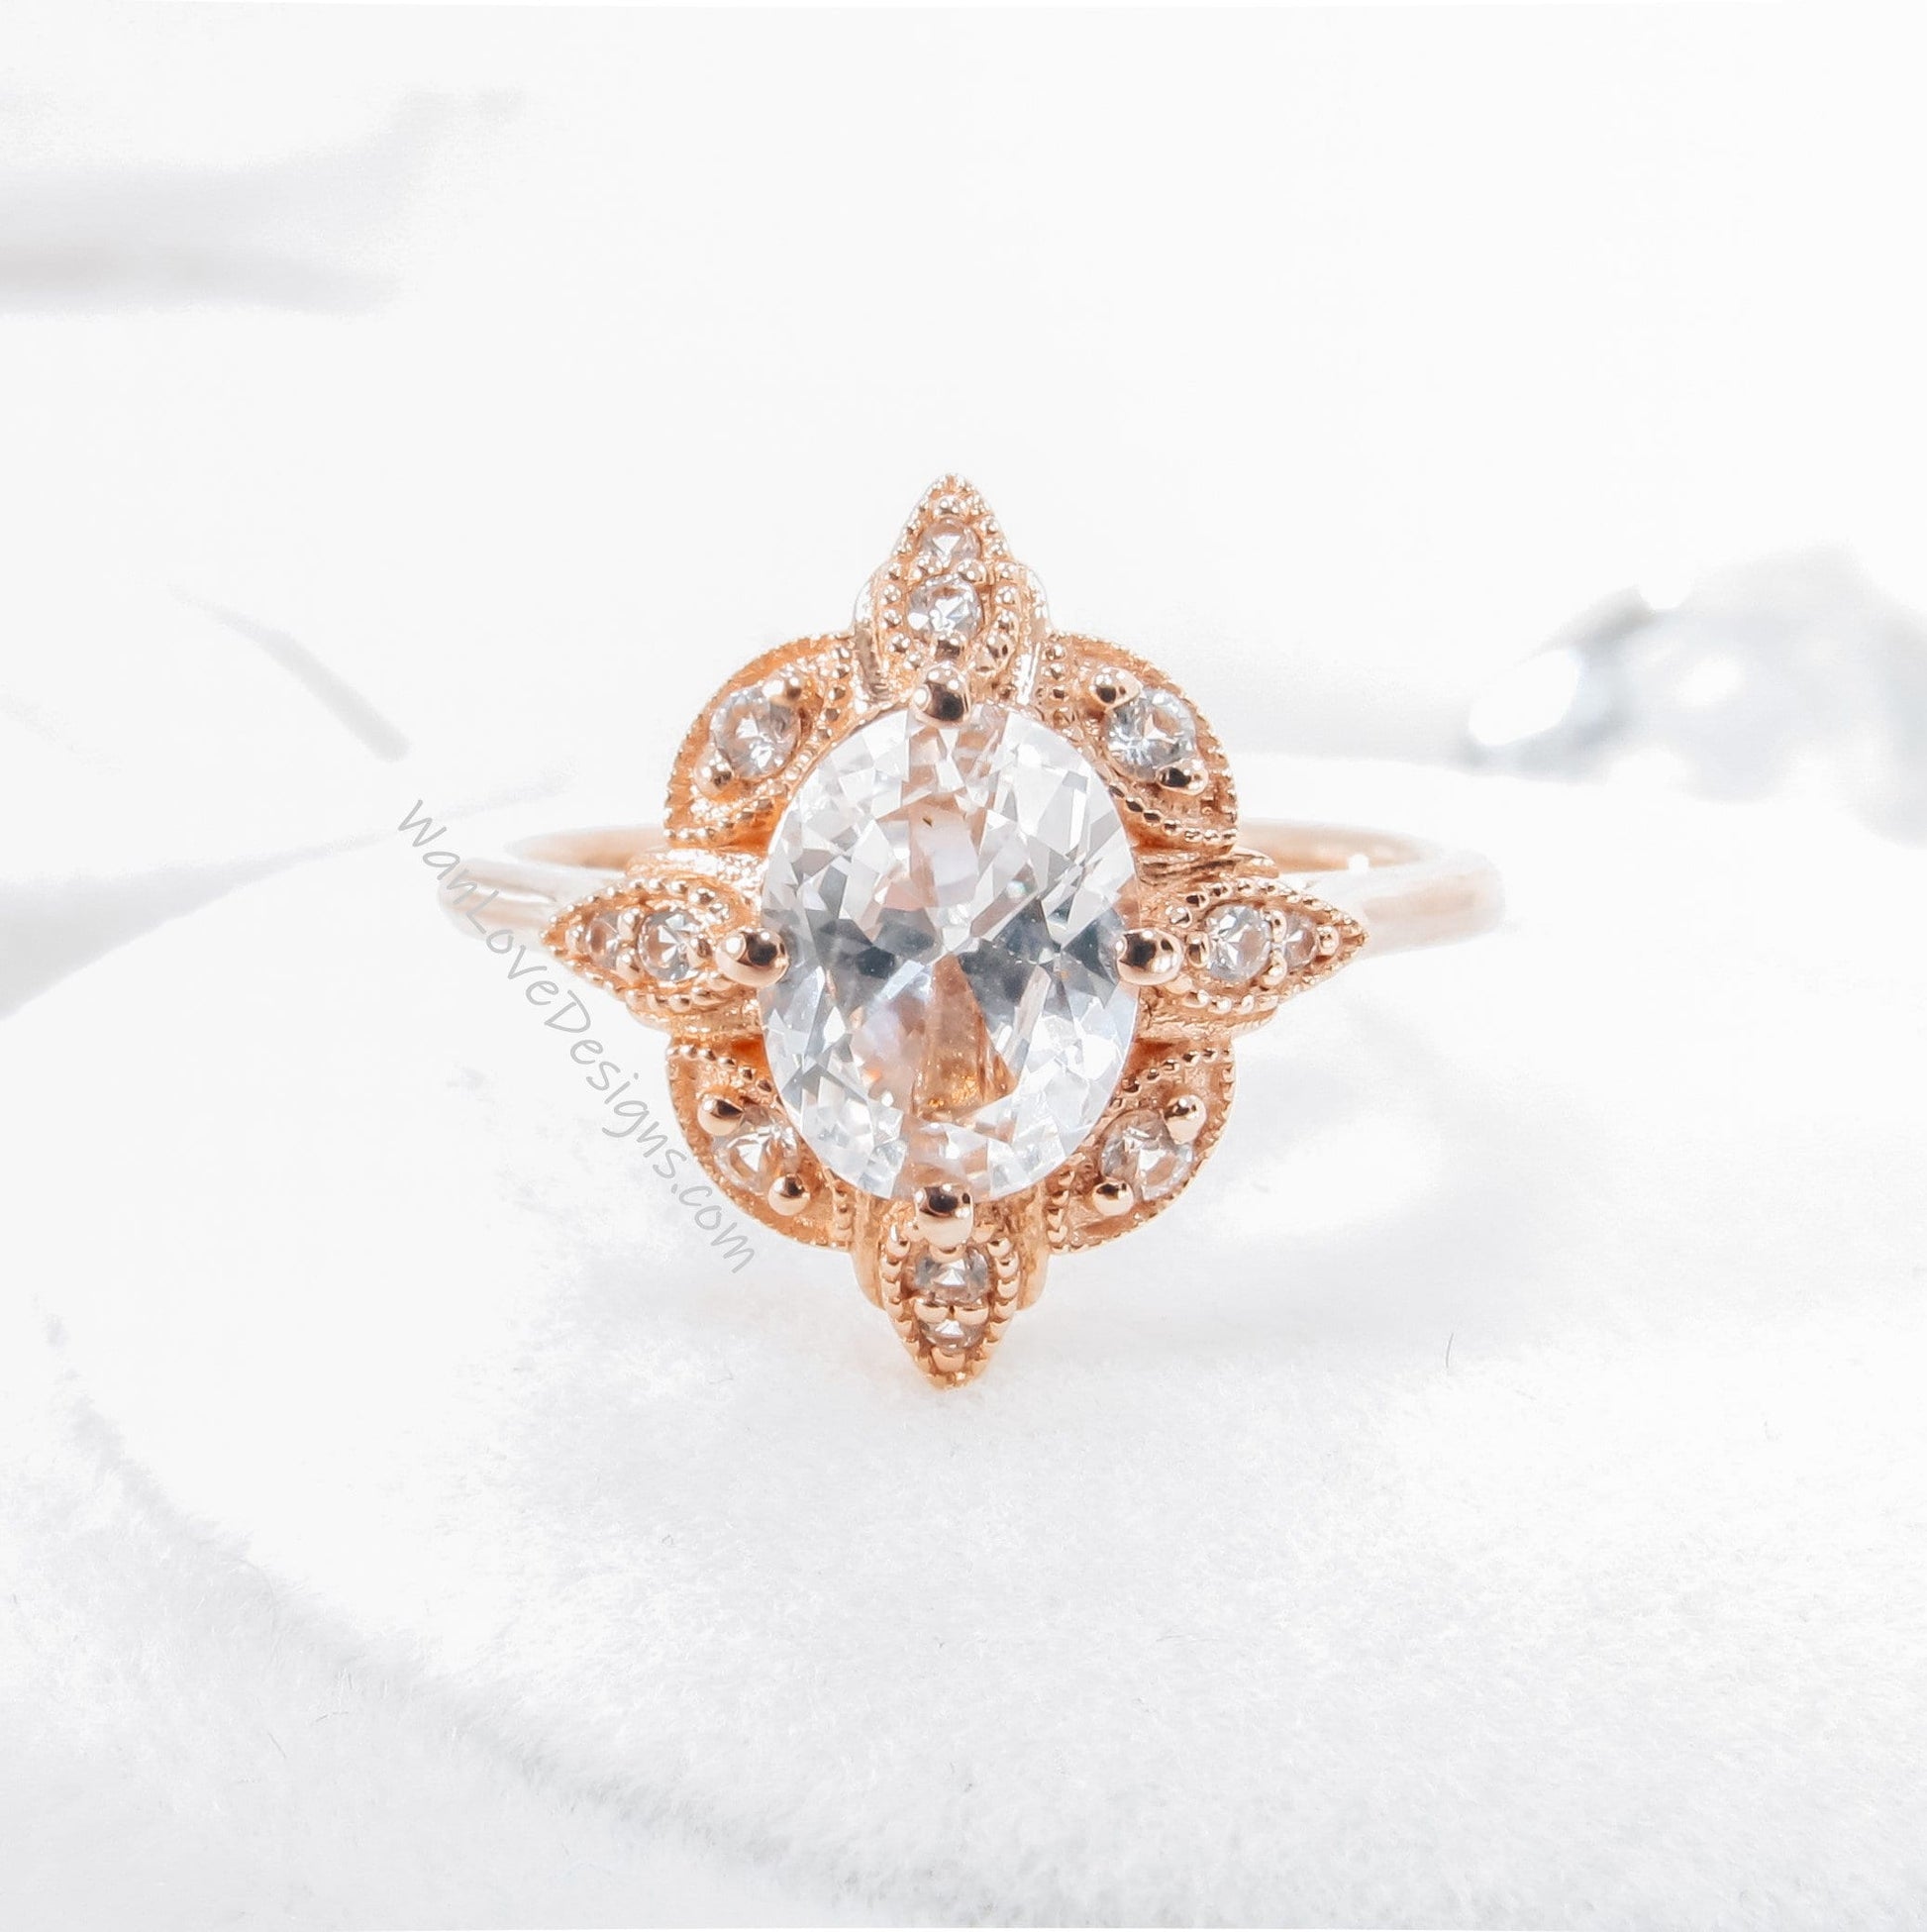 Antique oval shape White Sapphire engagement ring vintage rose gold milgrain ring oval cut diamond halo ring anniversary promise bridal ring Wan Love Designs